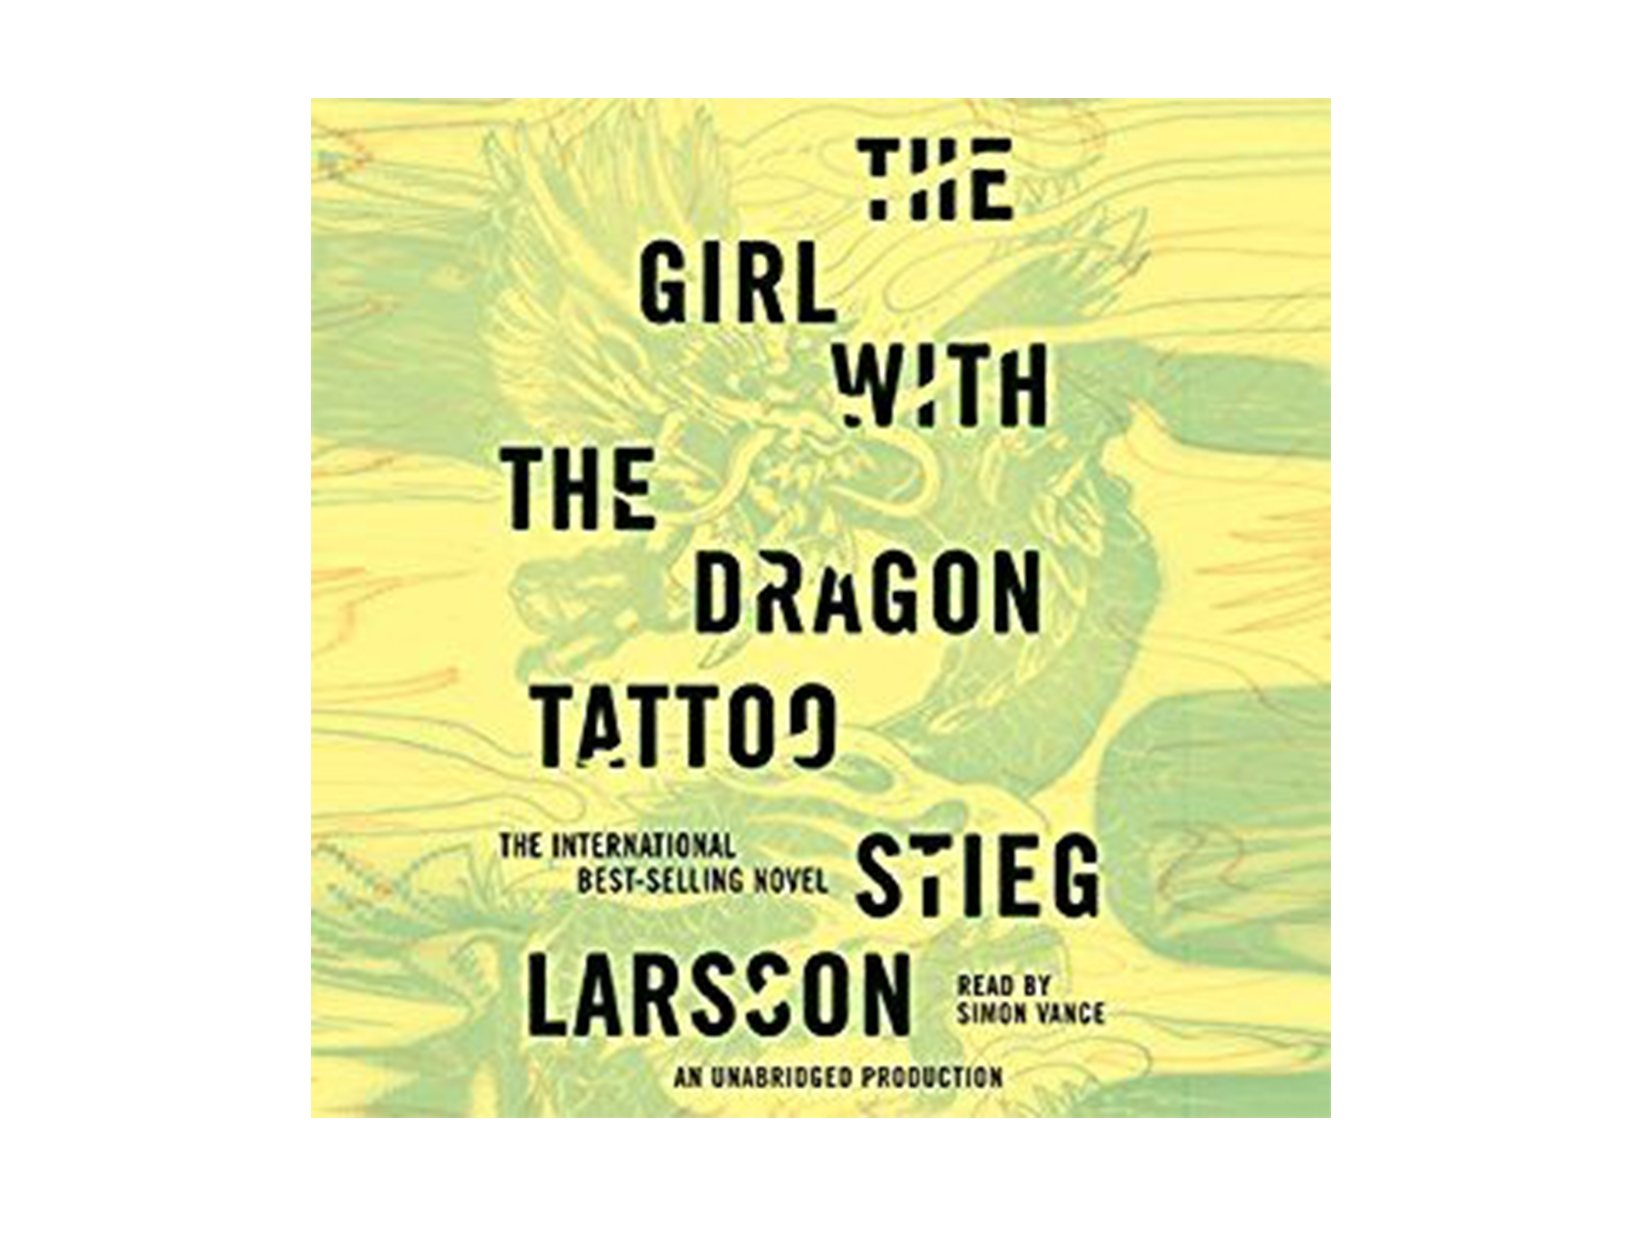 The Girl with the Dragon Tattoo by Stieg Larsson, read by Simon Vance